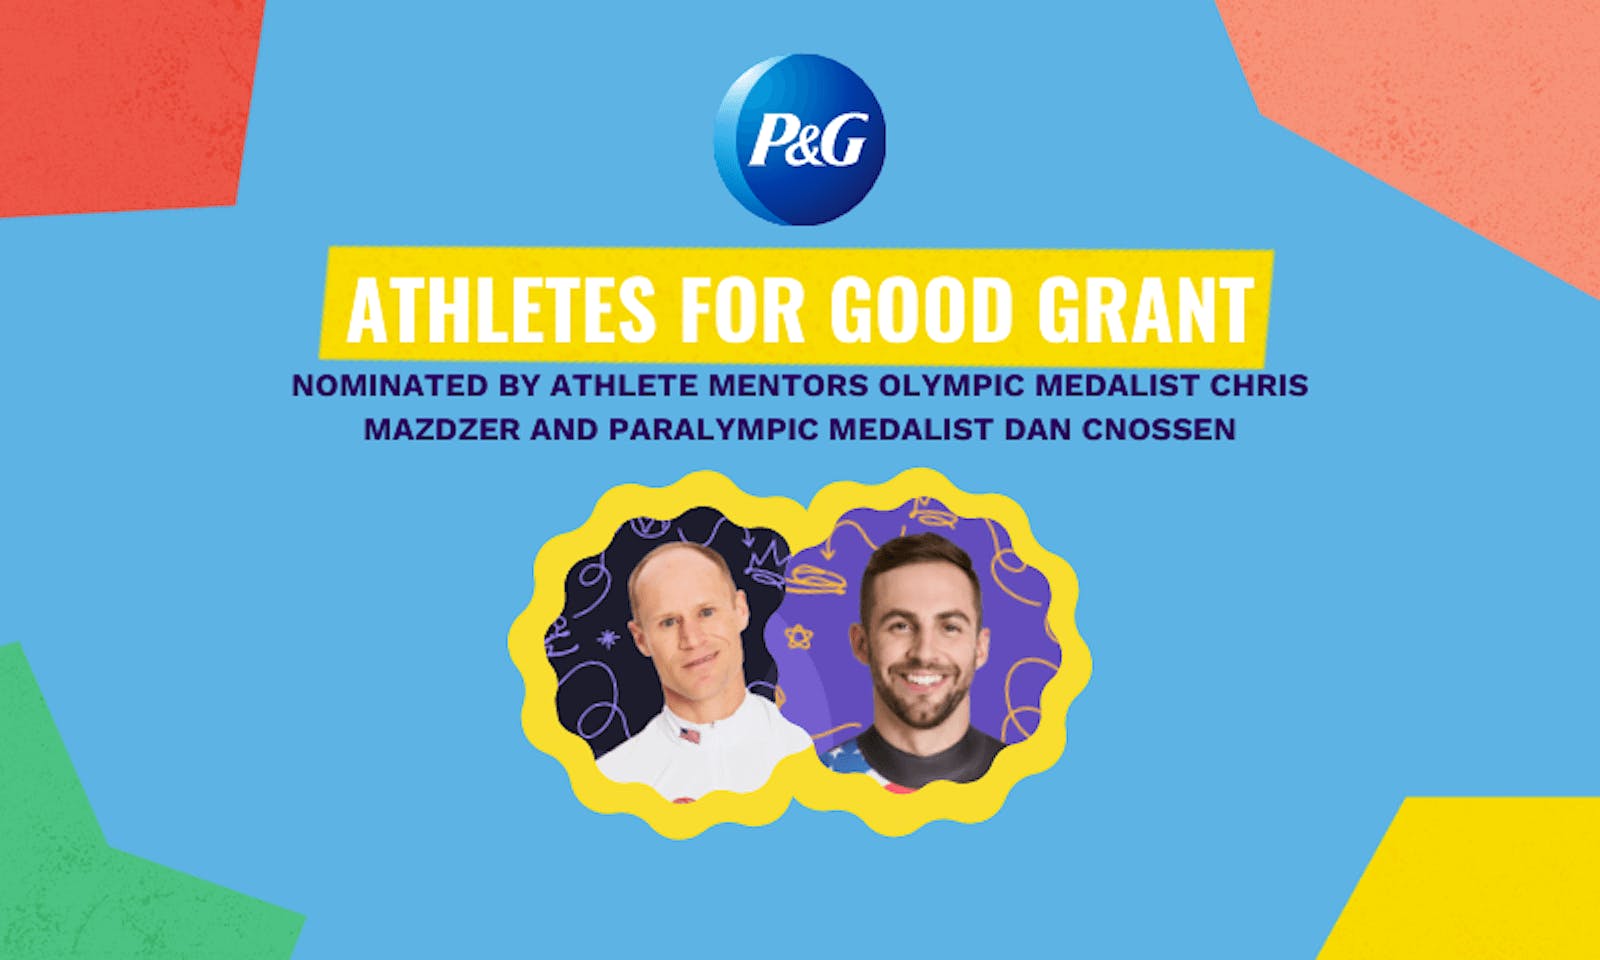 Headshots of Chris Mazdzer and Dan Cnossen with the Proctor & Gamble logo, above the text 'Athletes for Good Grant'